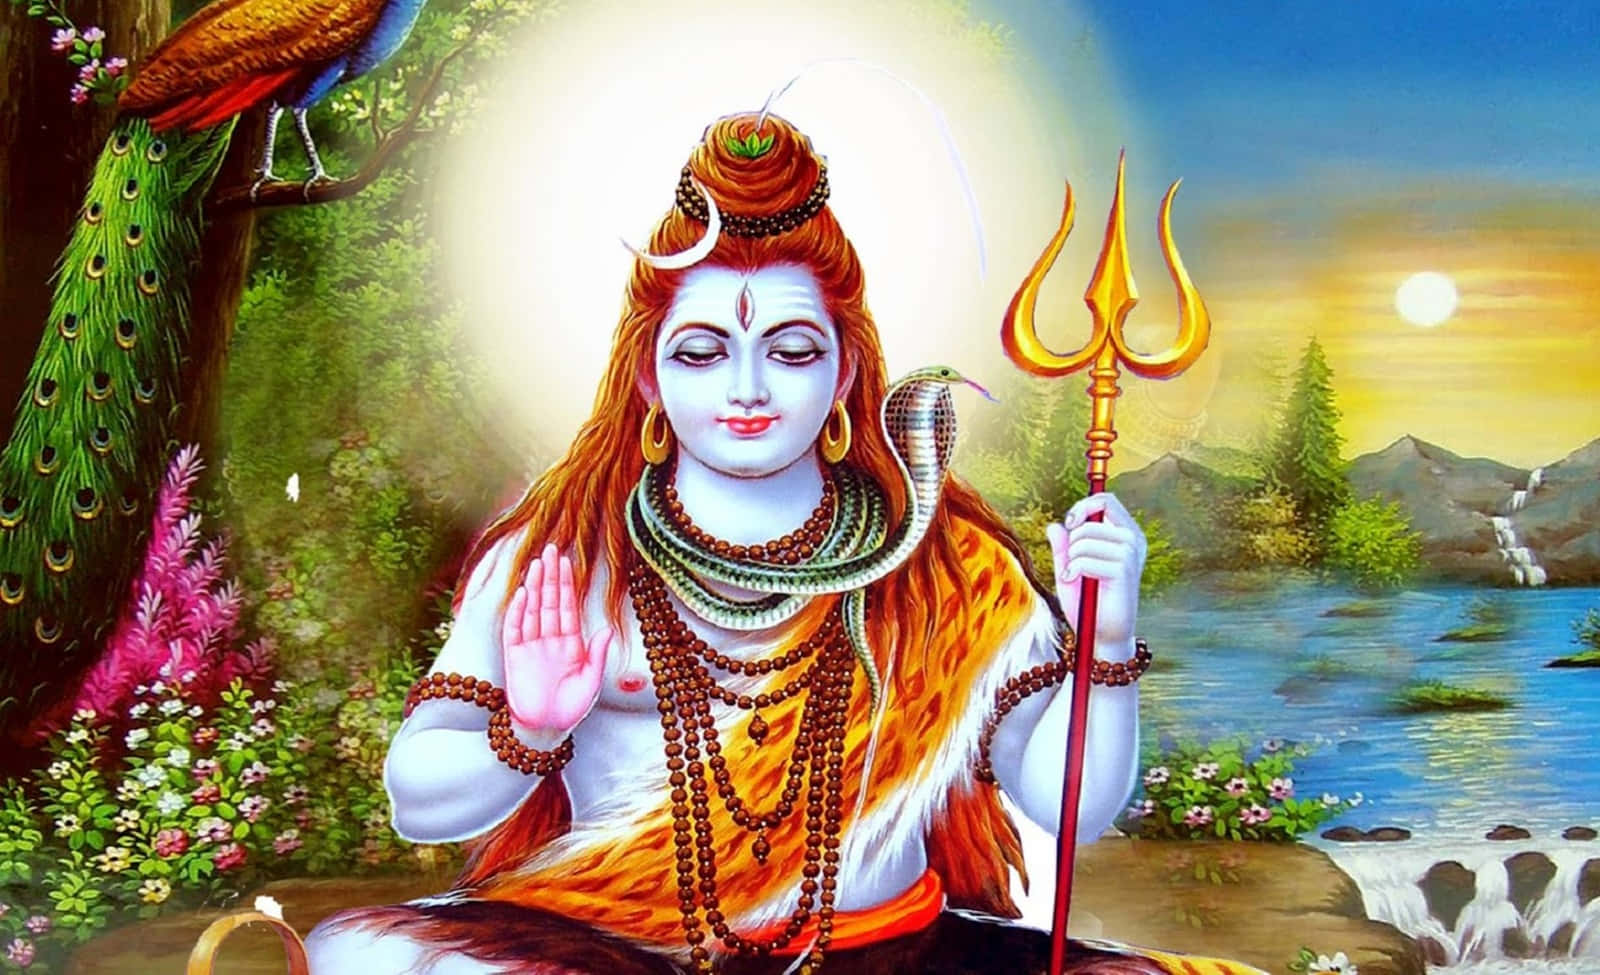 Lord Shiva Sitting On The Ground With A Bird